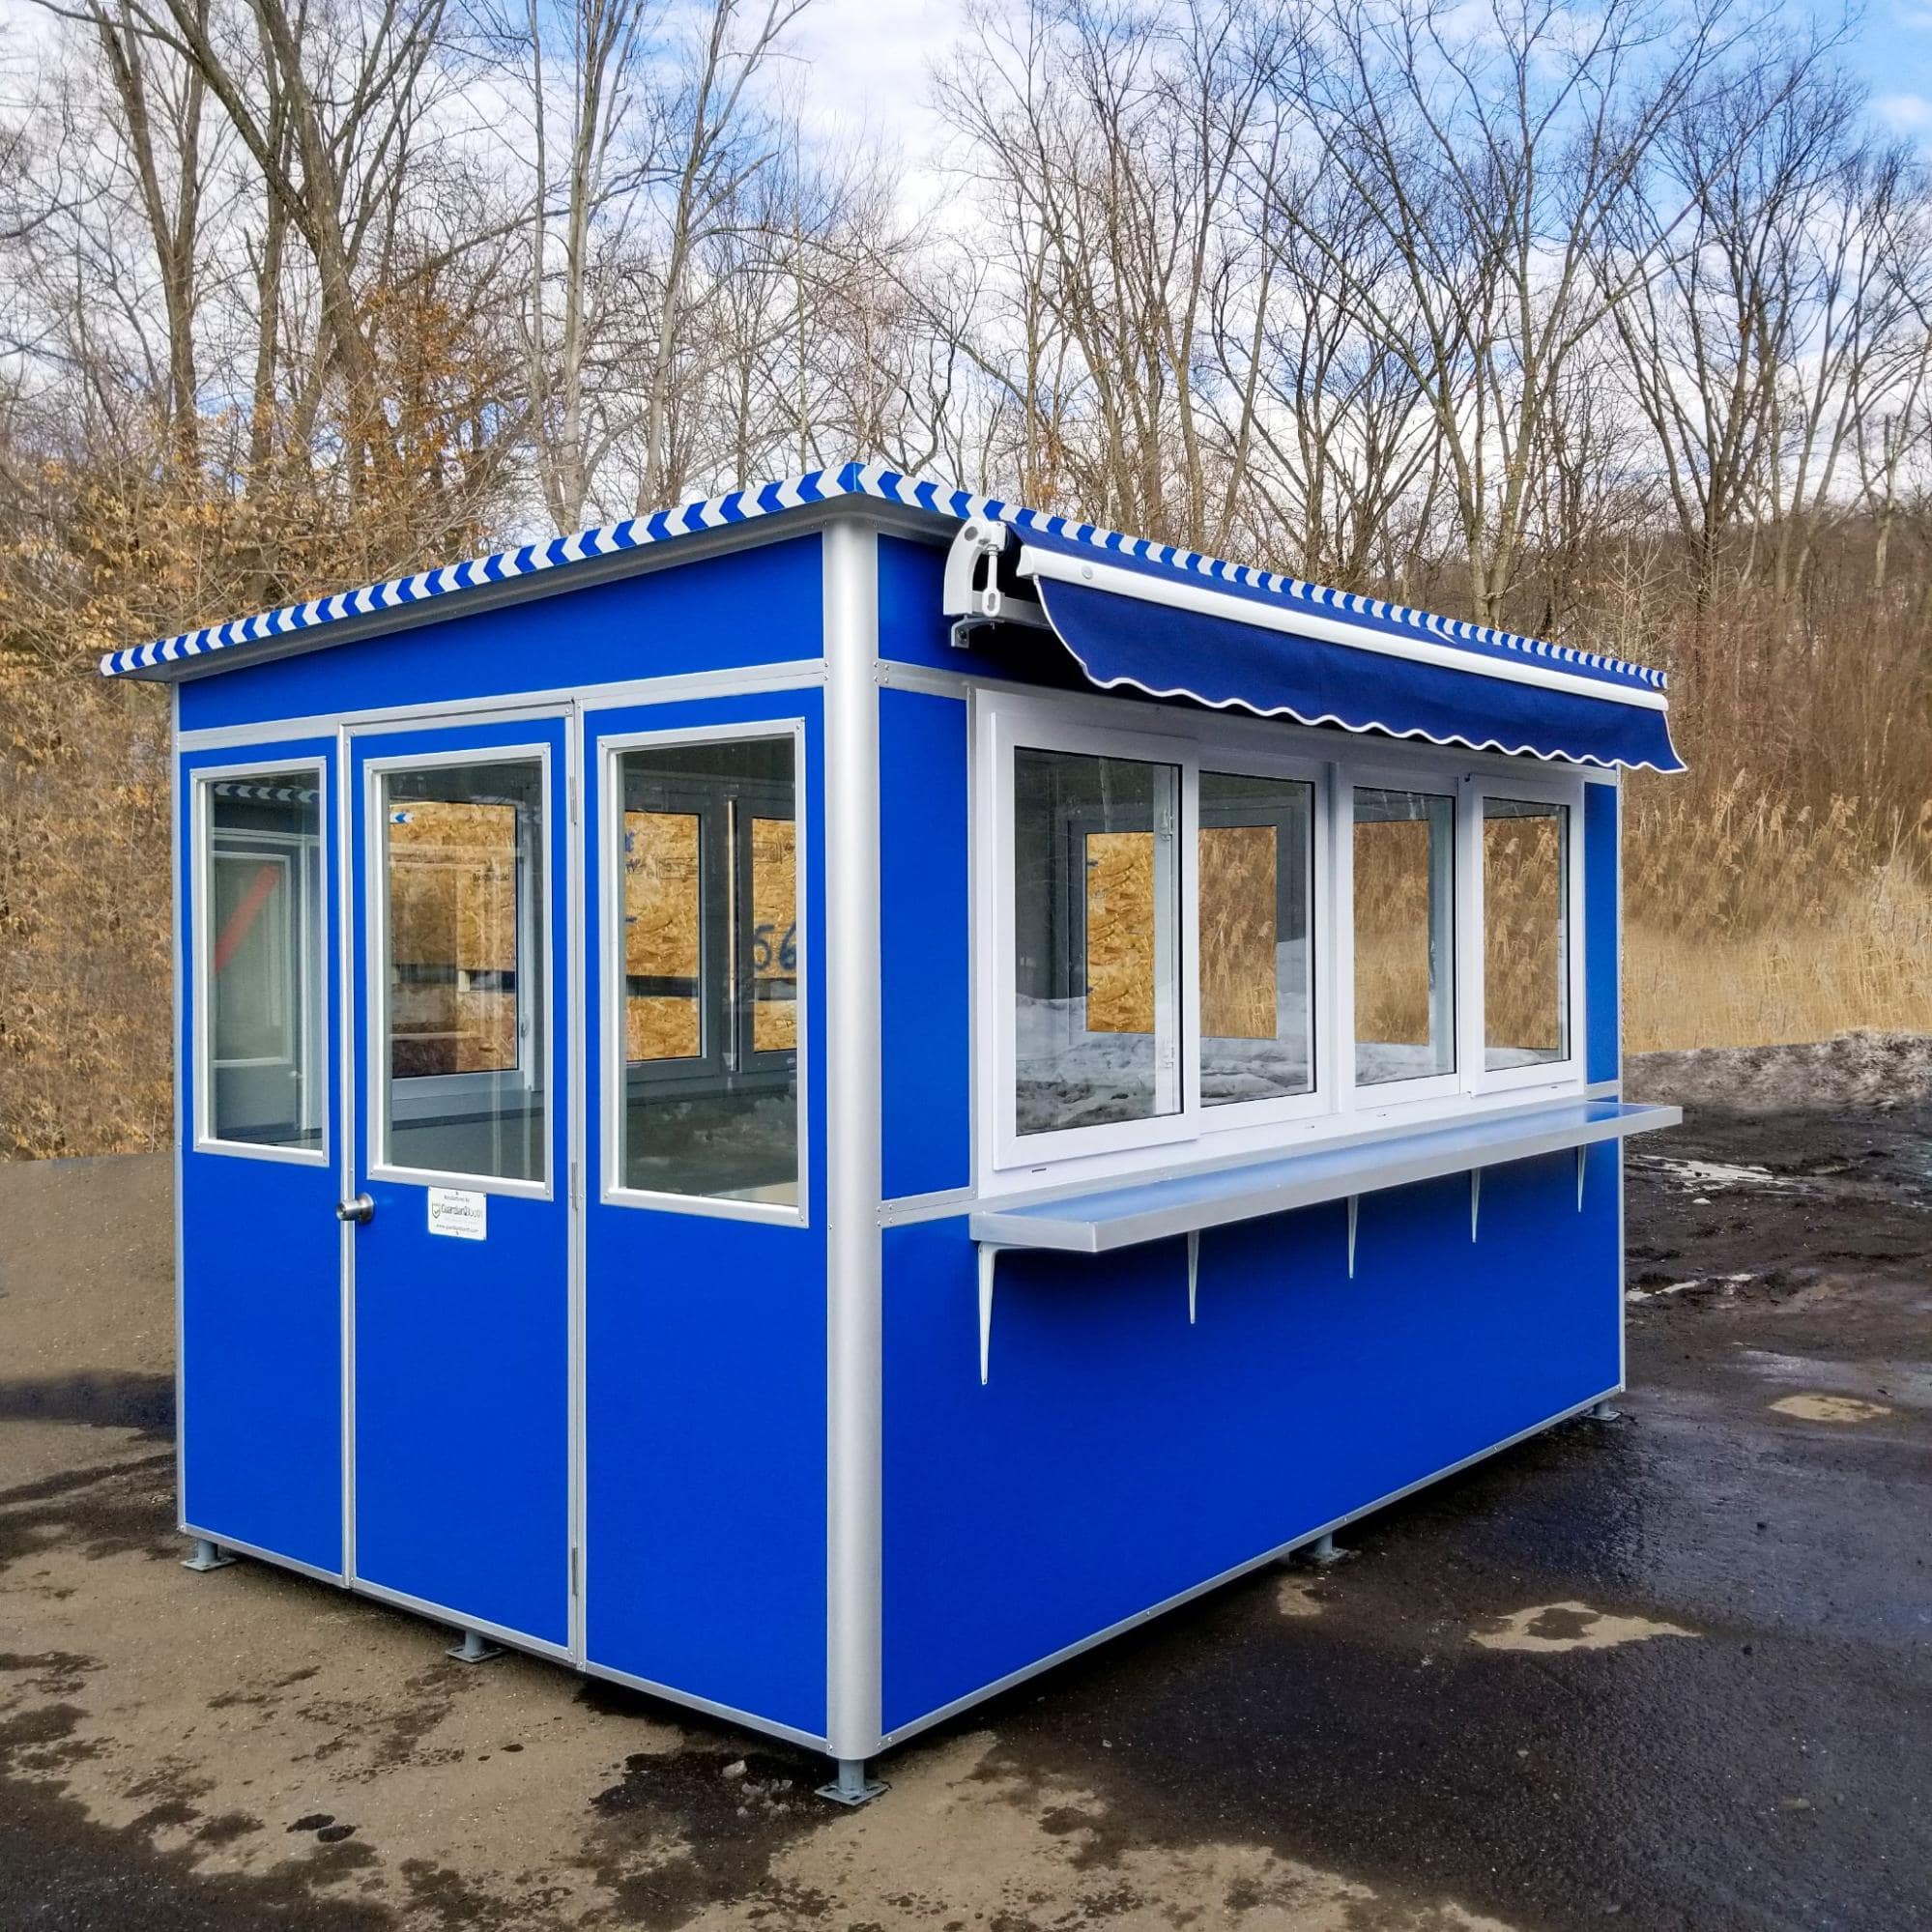 A large modular booth with awnings and a customer service counter